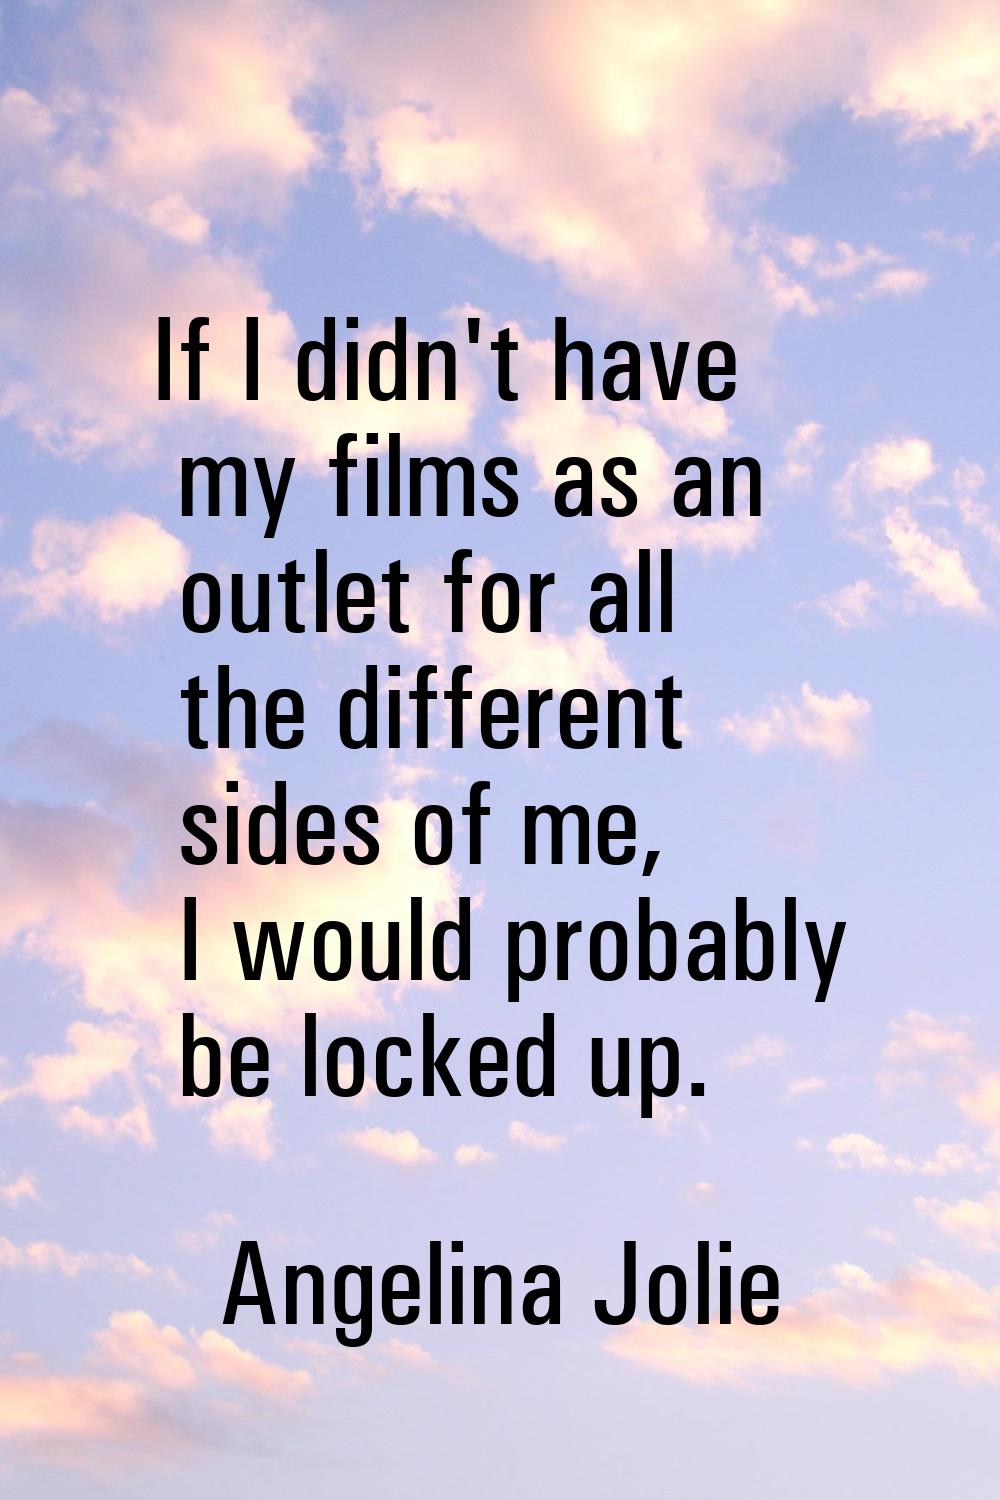 If I didn't have my films as an outlet for all the different sides of me, I would probably be locke